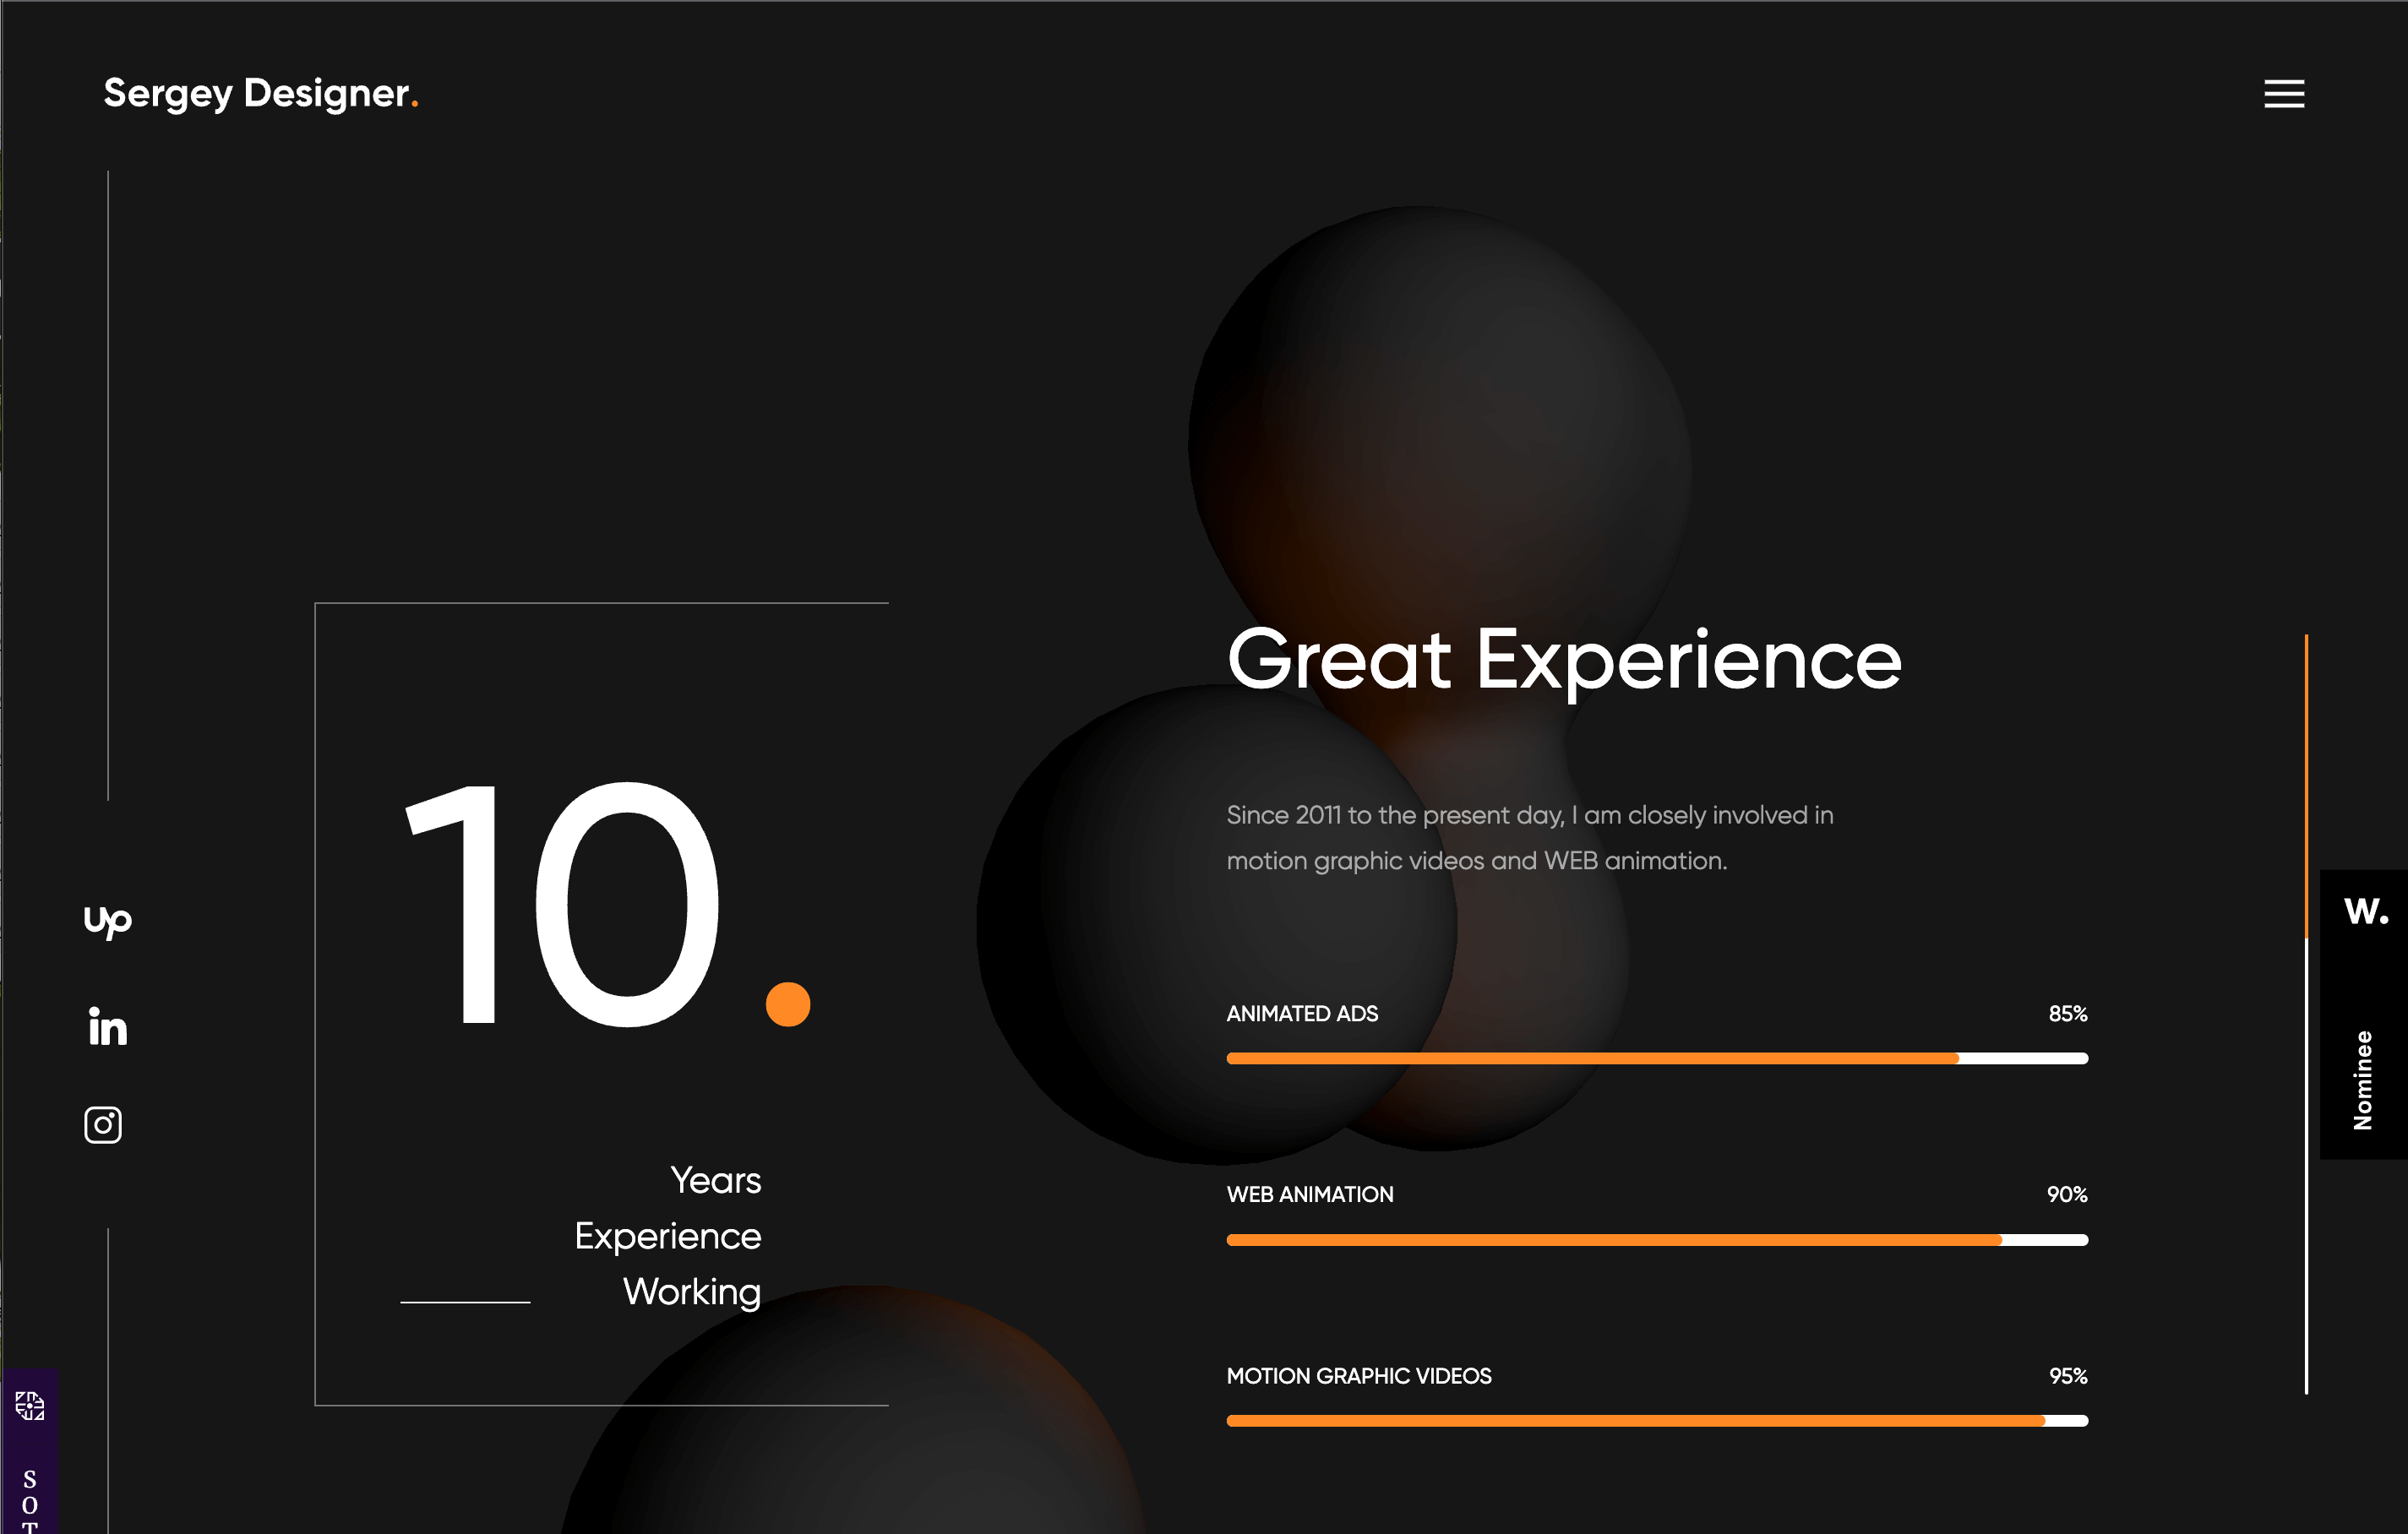 Sergey Designer's experience page. The highlights include animated ads, web animation, and motion graphic videos. The background image is of 3D, abstract blobs. 